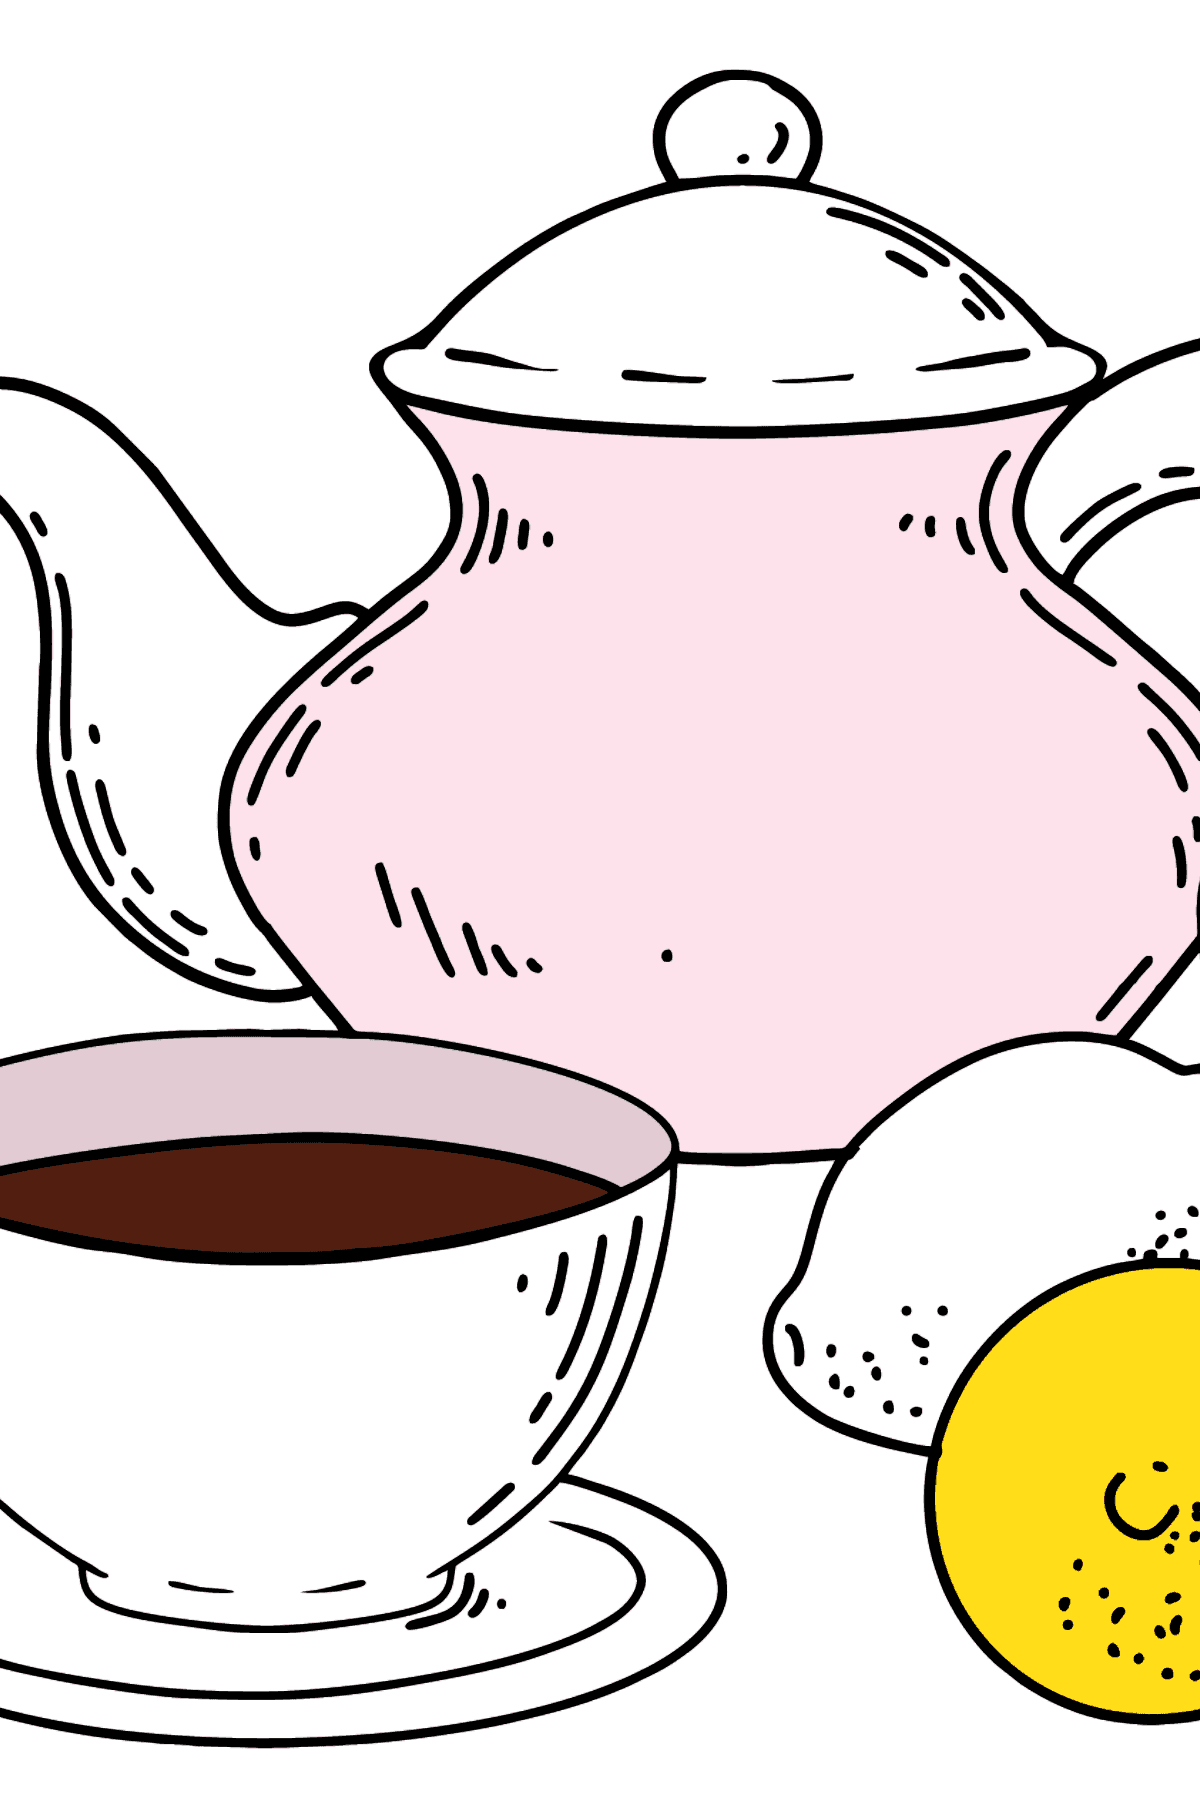 Tea Cup and Teapot coloring page - Coloring Pages for Kids